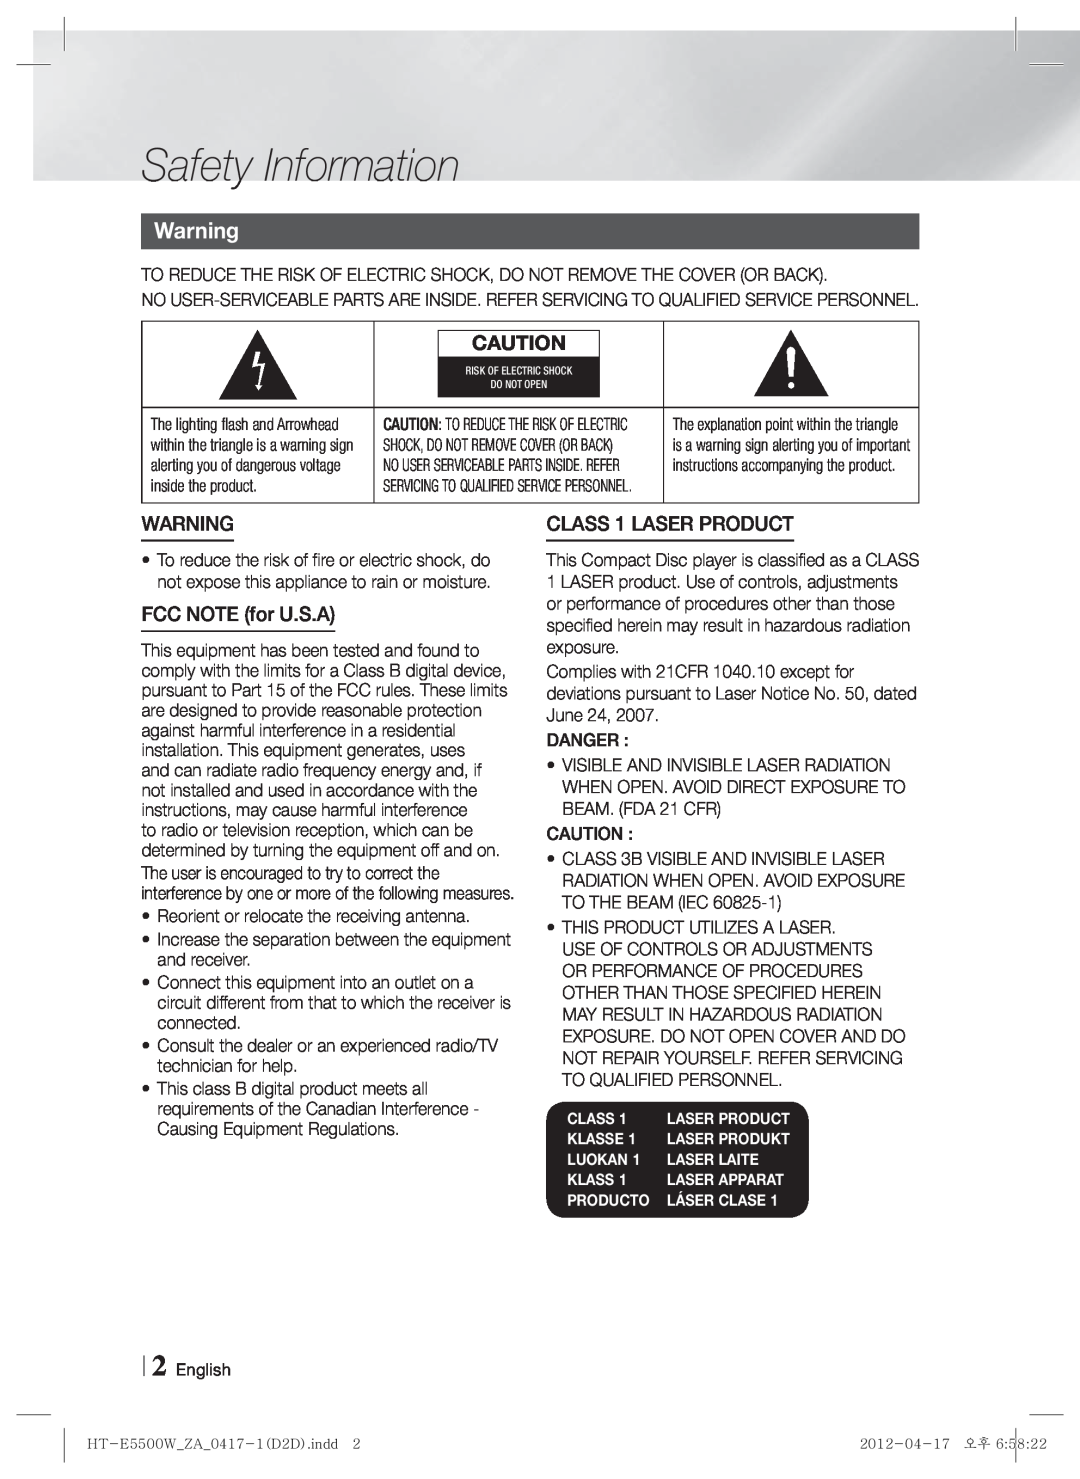 Samsung HT-E550 user manual Safety Information, FCC NOTE for U.S.A, CLASS 1 LASER PRODUCT 